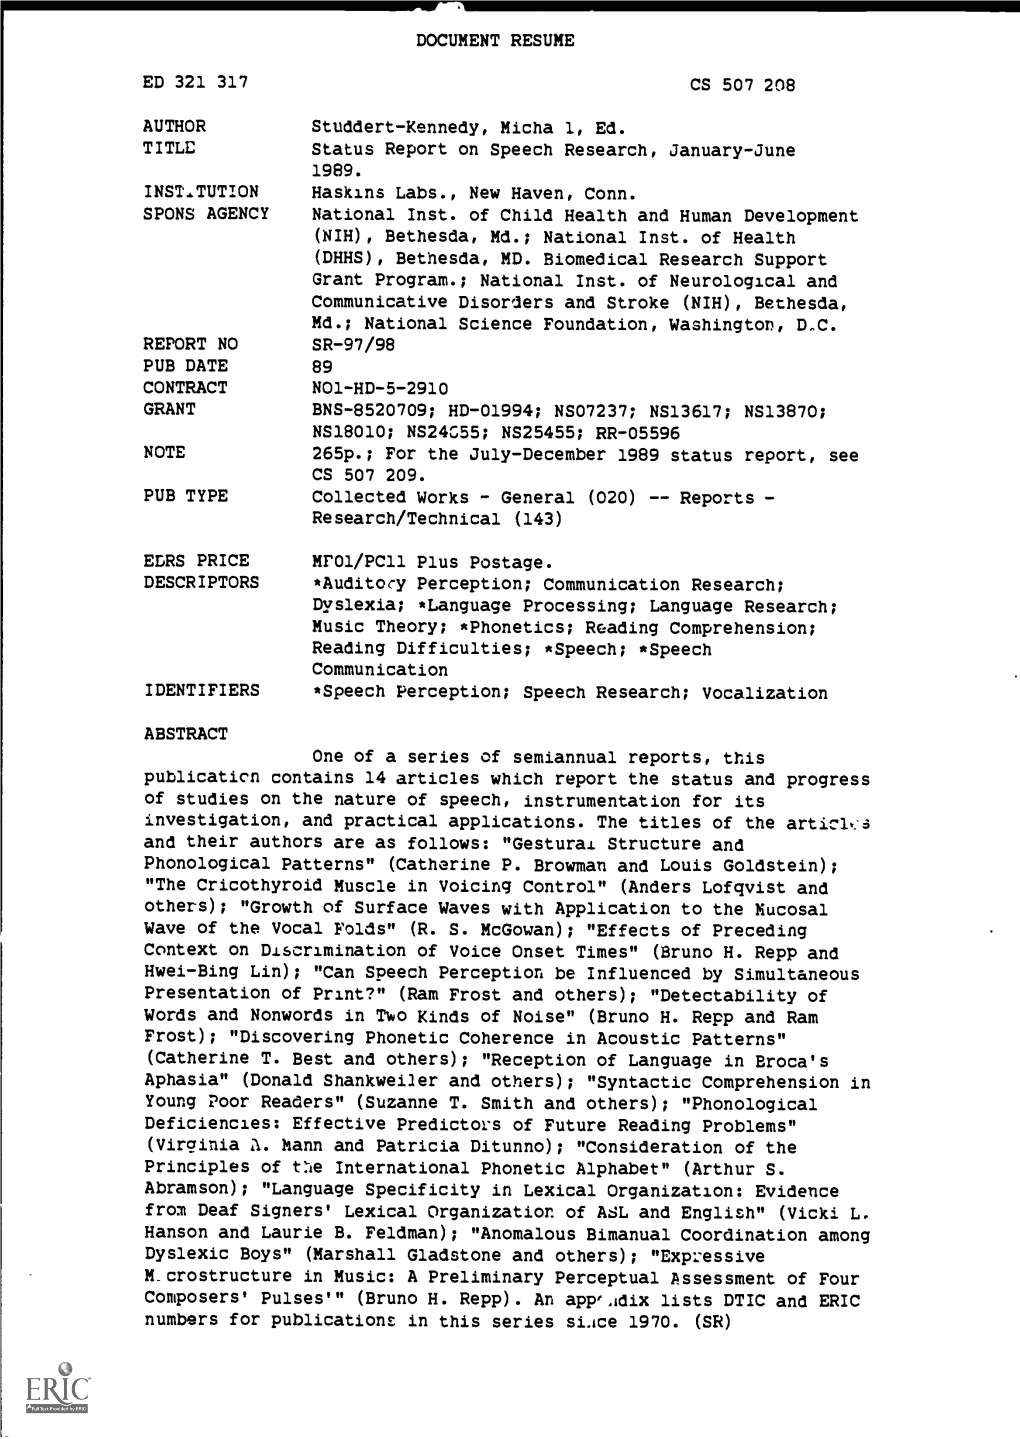 Status Report on Speech Research, January-June 1989. INST.TUTION Haskins Labs., New Haven, Conn